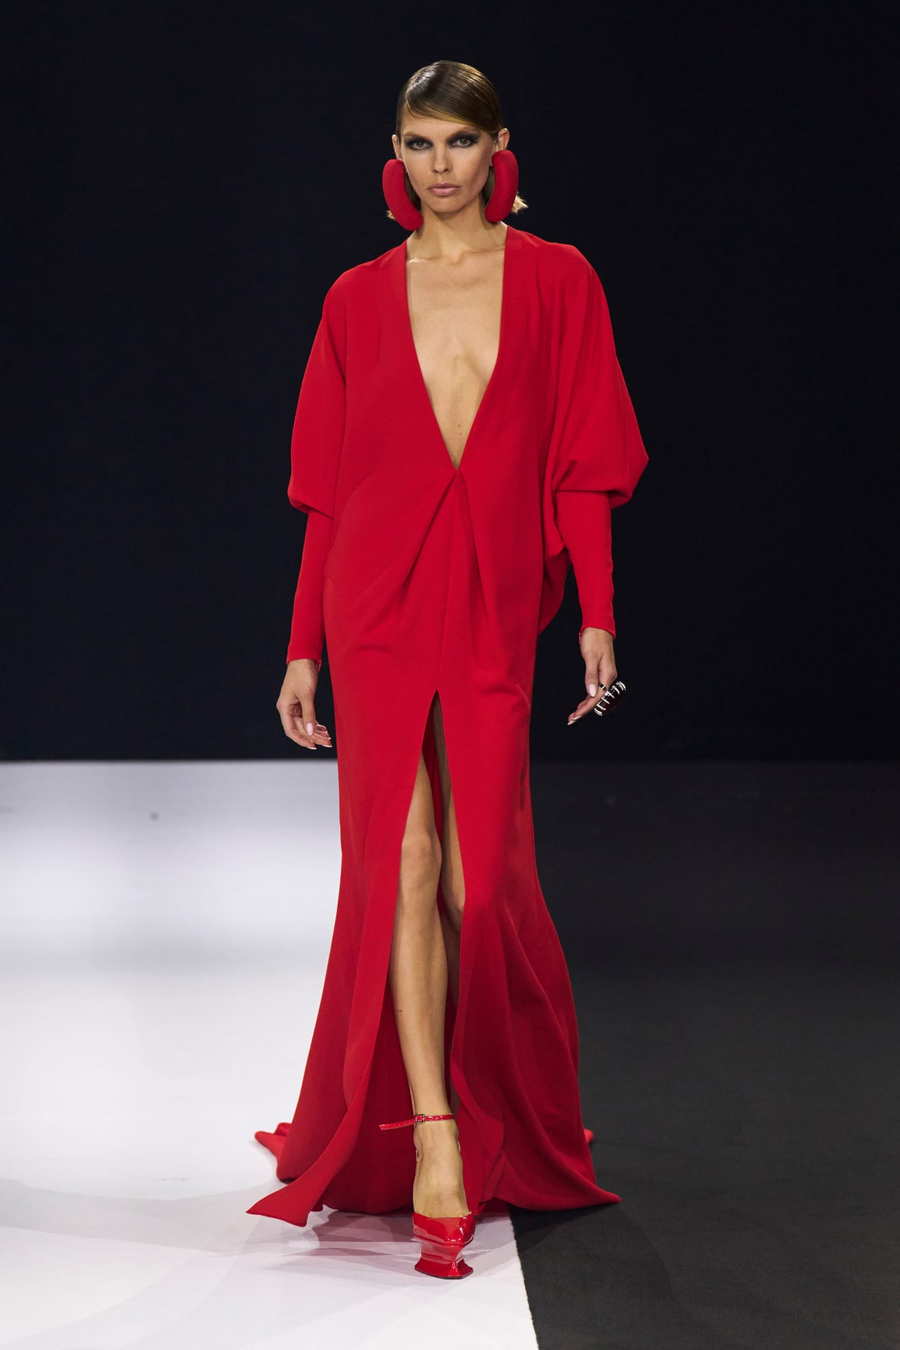 Stéphane Rolland model sports a candy apple red dress and platform shoes at Paris Fashion Week 2022.